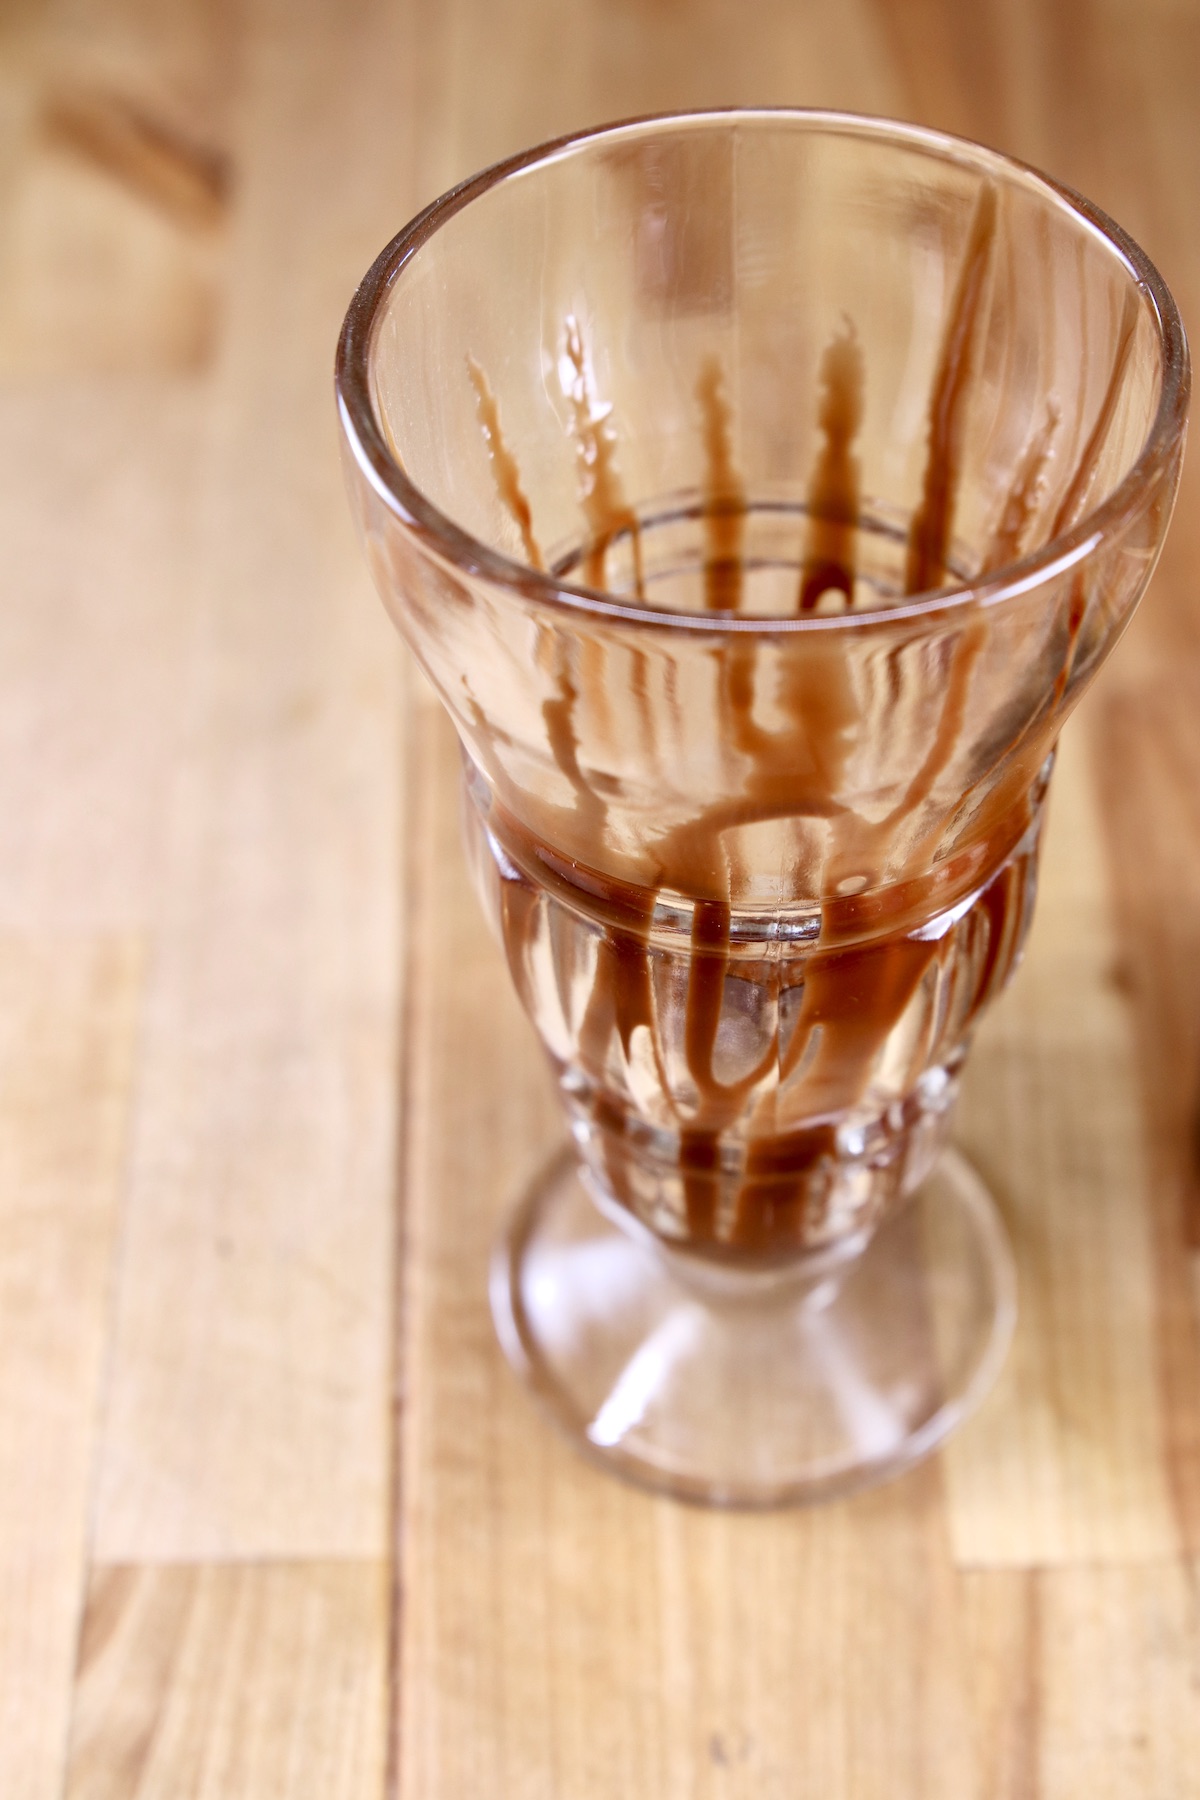 milkshake glass drizzled with chocolate syrup